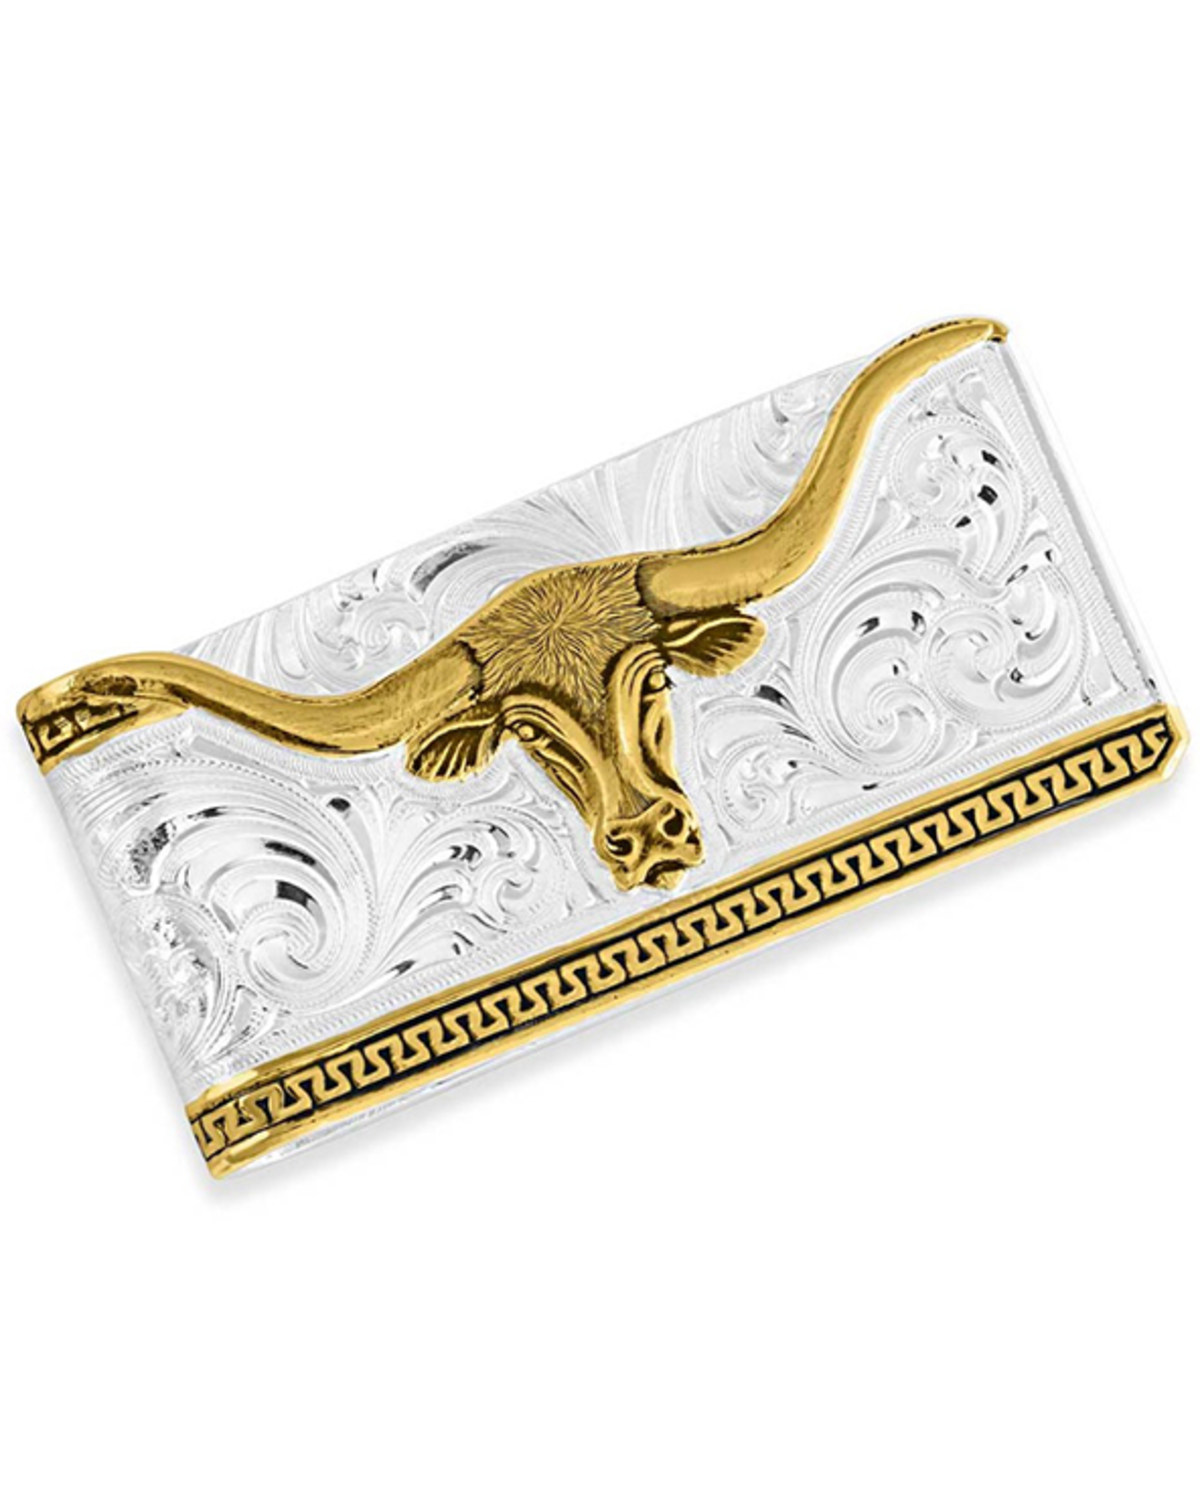 Montana Silversmiths Two-Tone Carved Longhorn Money Clip